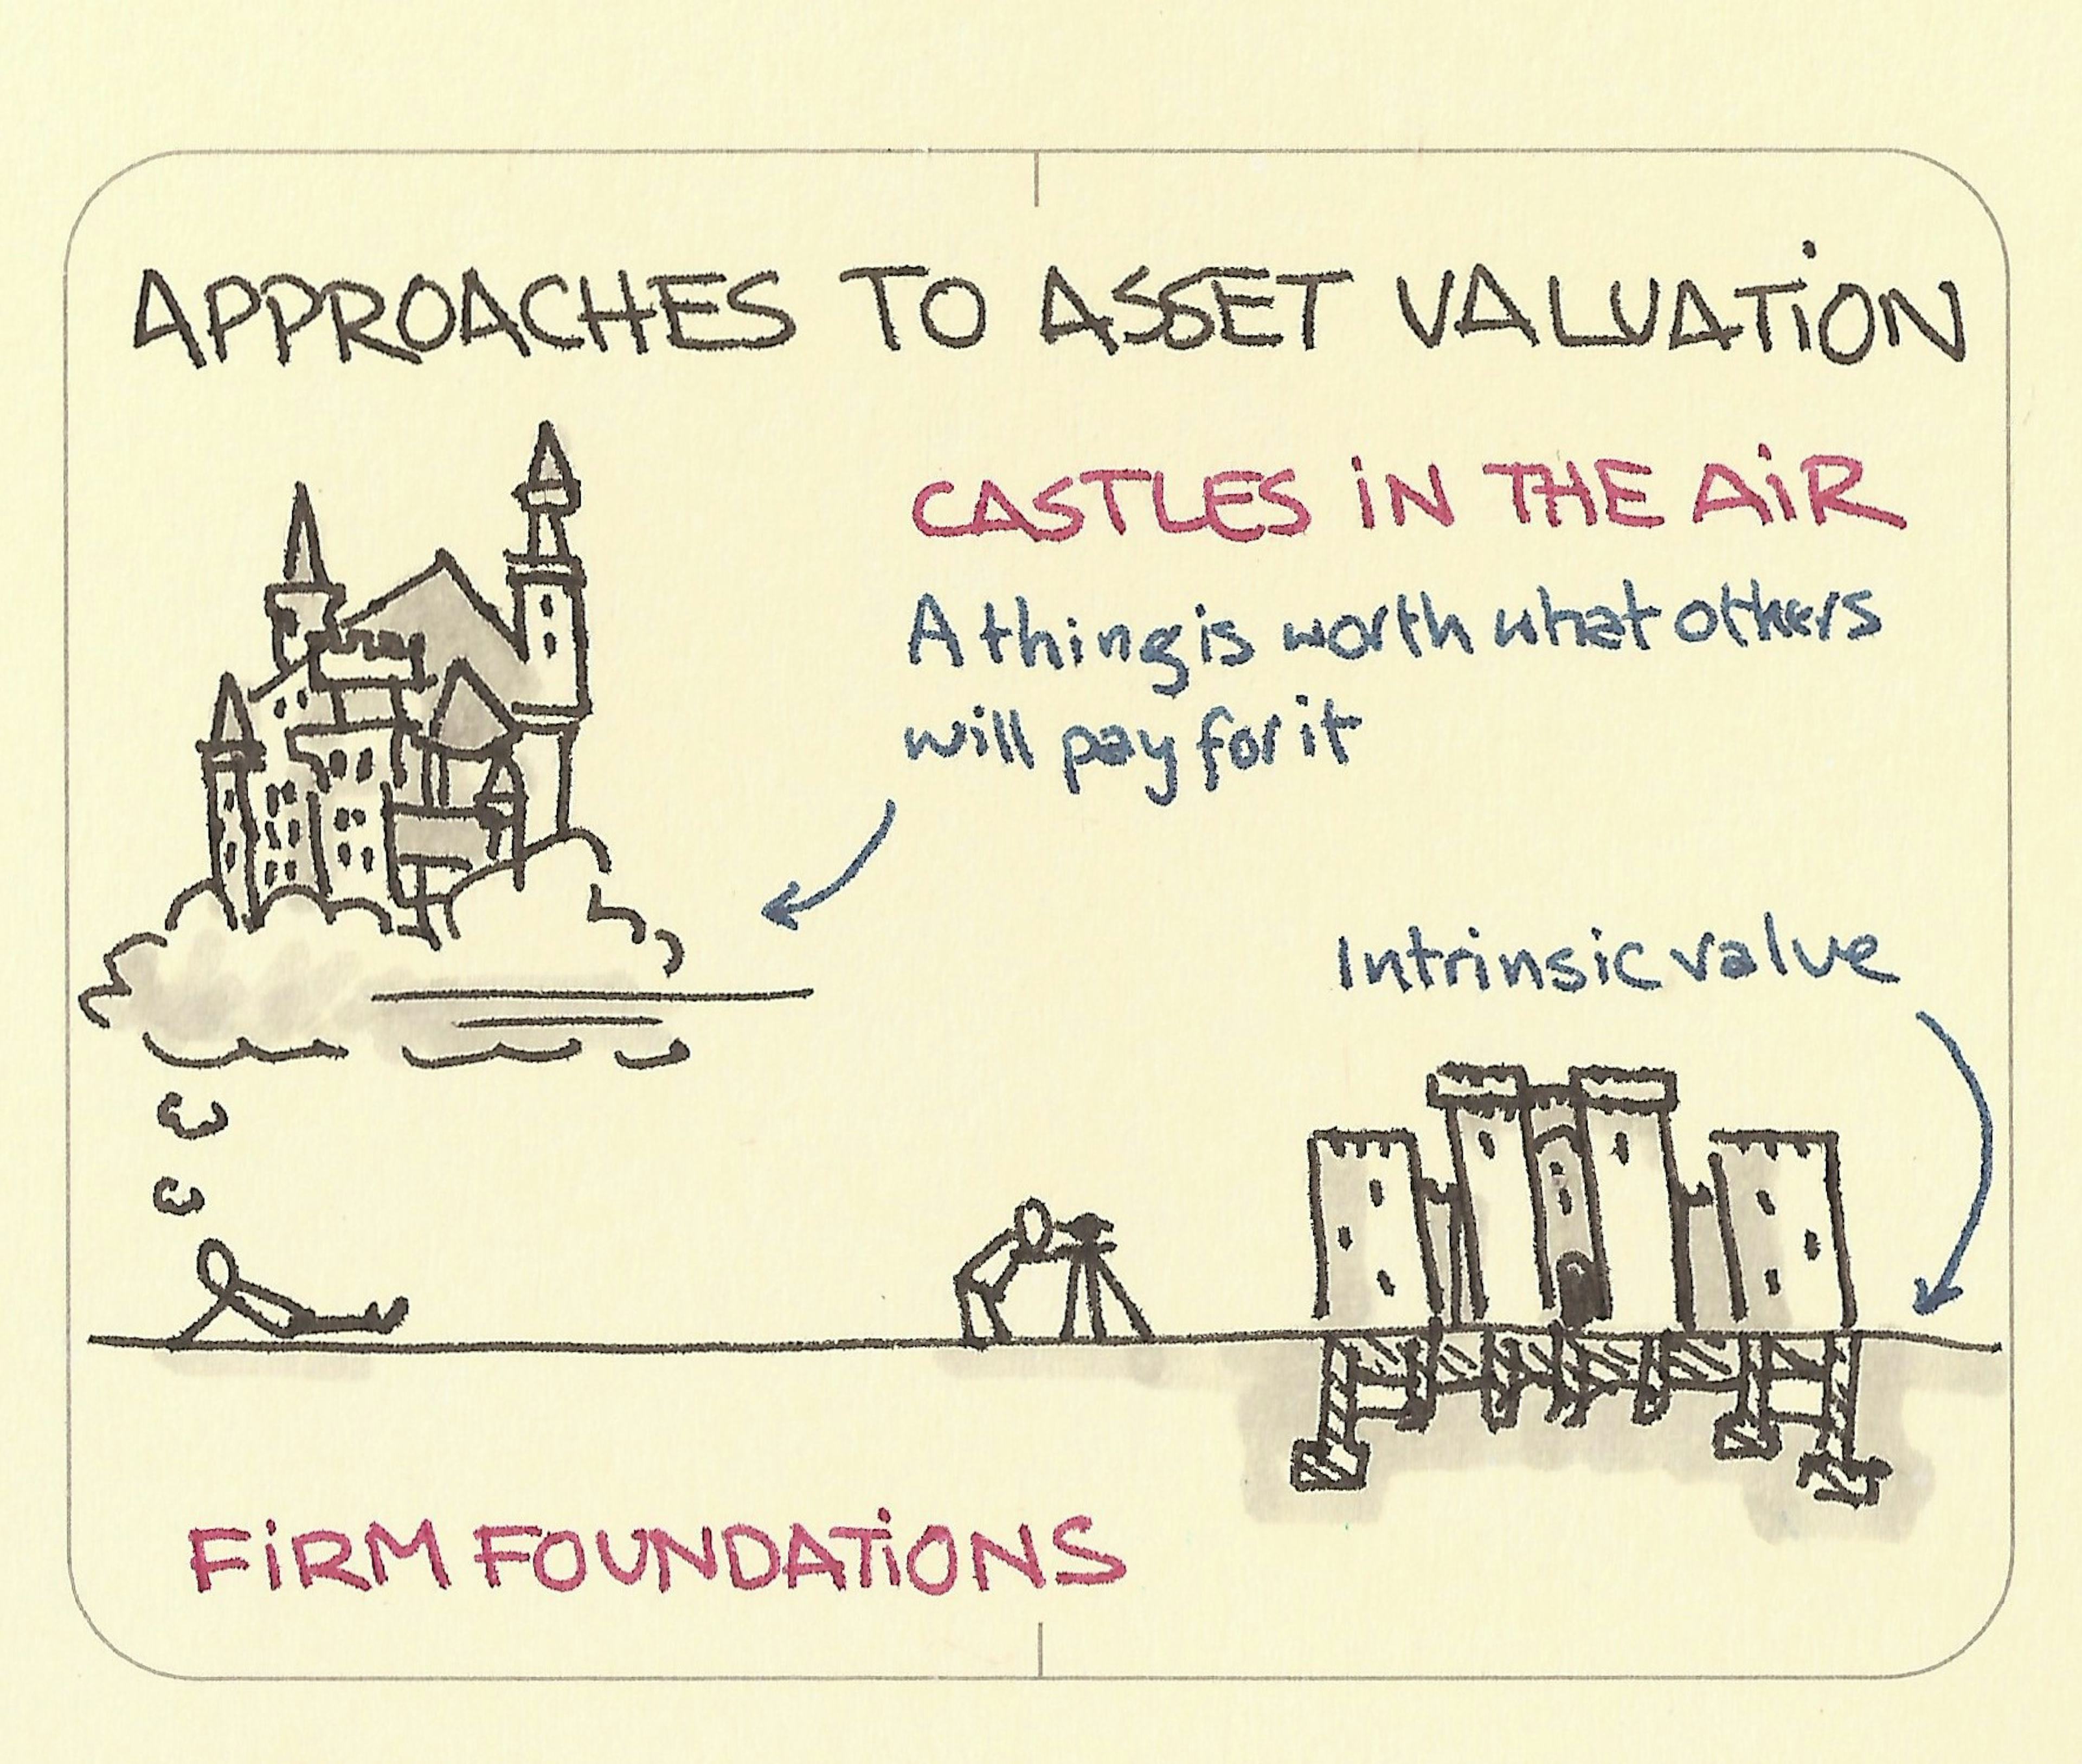 Approaches to asset valuation: the castles in the air approach and the firm foundations approach